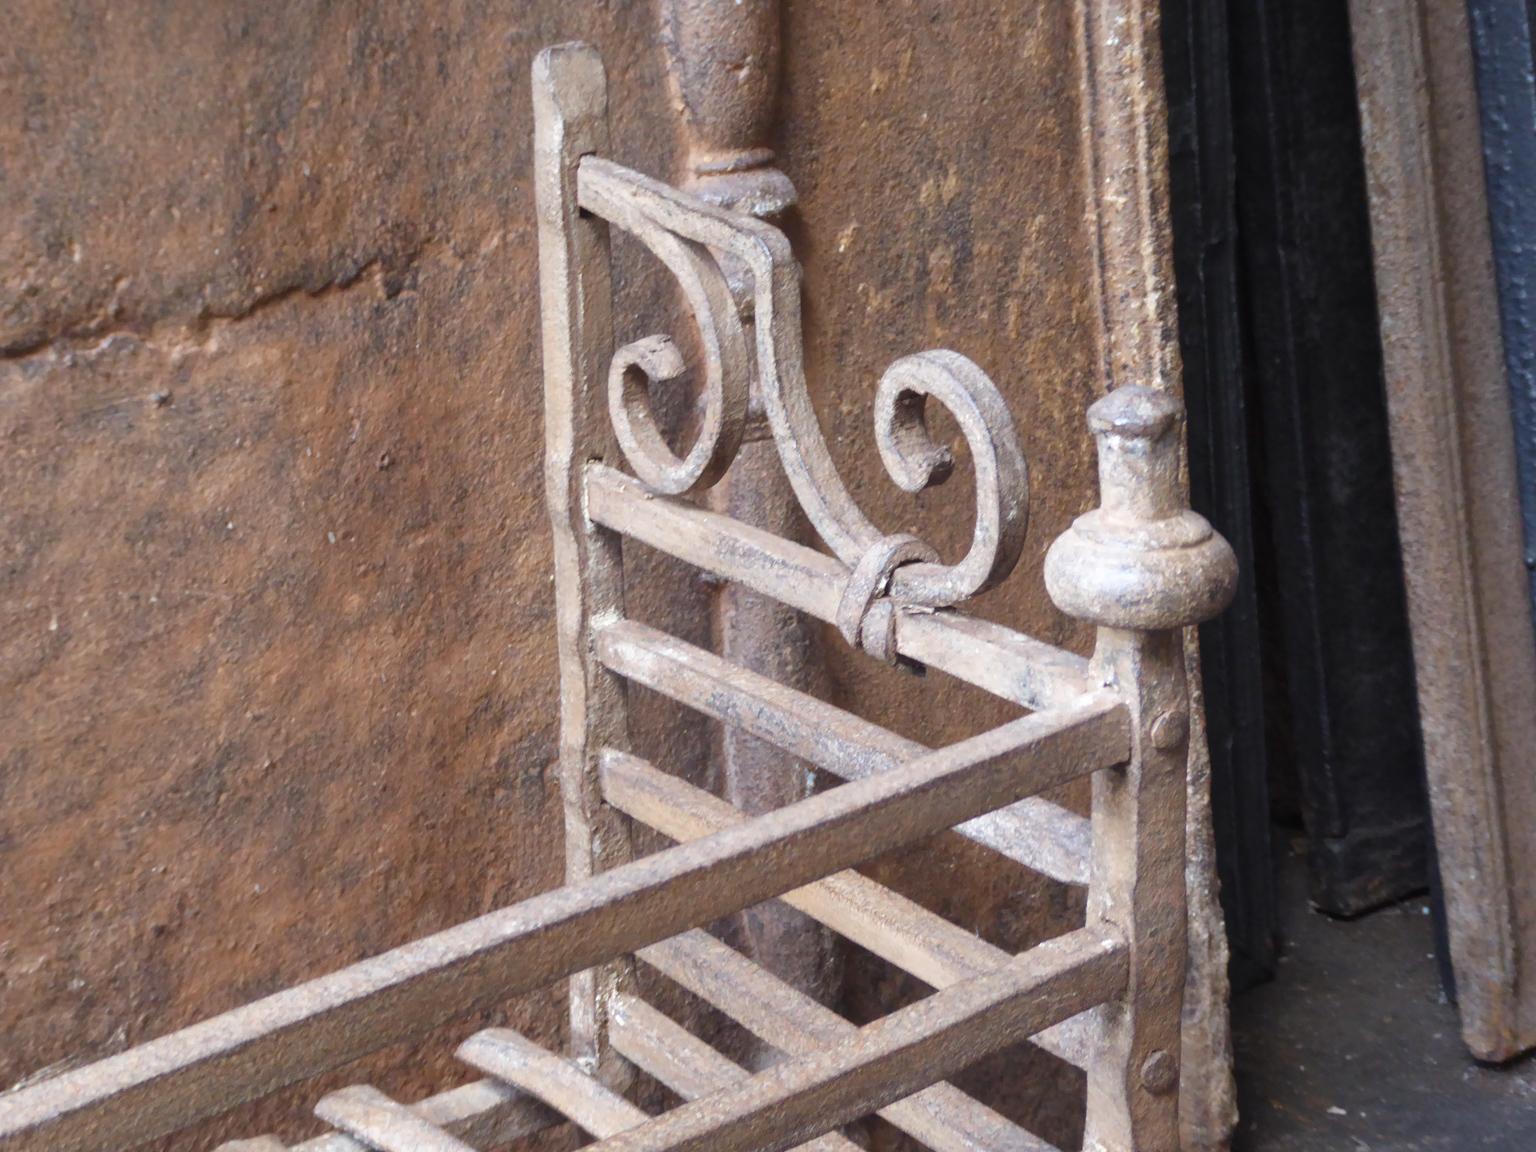 Wrought Iron 18th-19th Century Dutch Neoclassical Fireplace Grate or Fire Basket